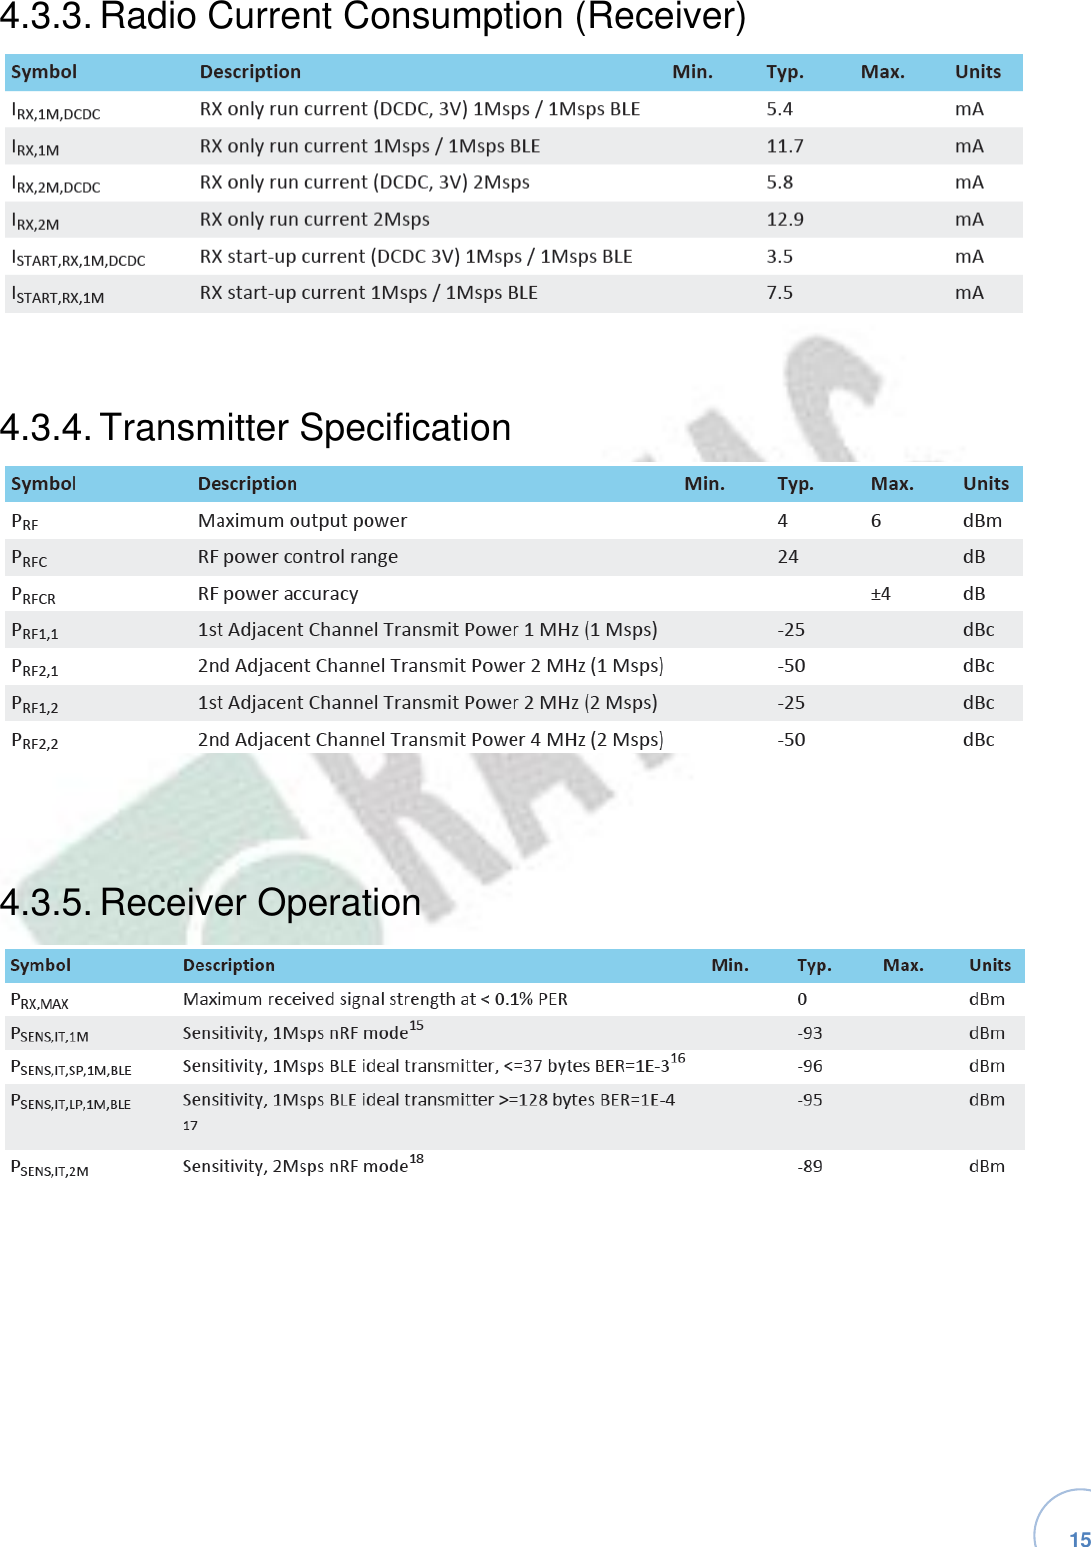   15 4.3.3. Radio Current Consumption (Receiver)4.3.4. Transmitter Specification4.3.5. Receiver Operation